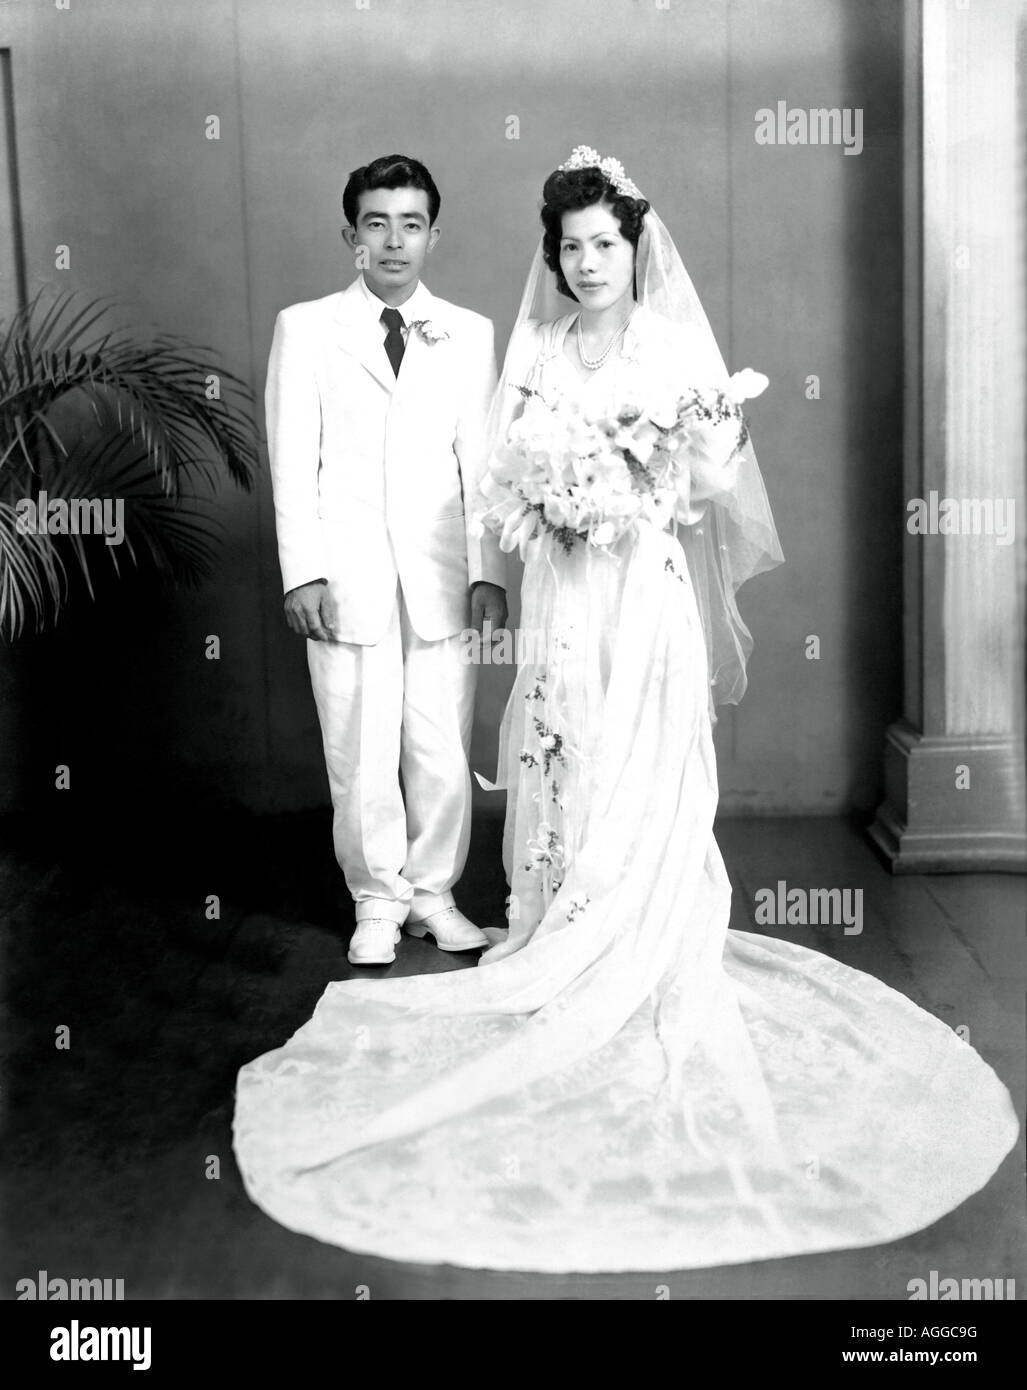 Married Couple 1960s Stock Photos & Married Couple 1960s Stock Images - Alamy1028 x 1390